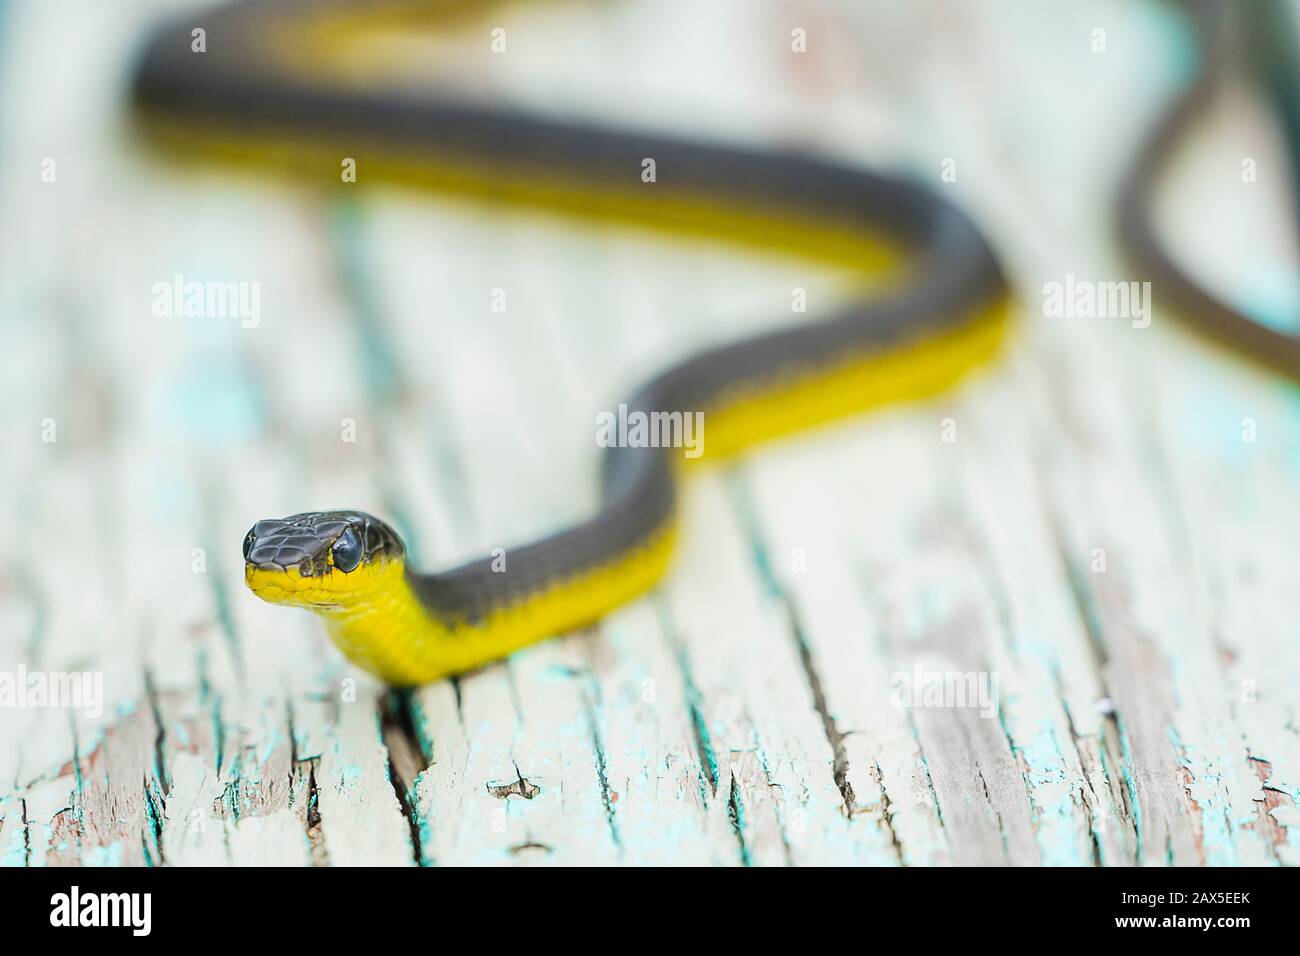 Common tree snake (Dendrelaphis punctulatus) on old wooden bench Stock Photo